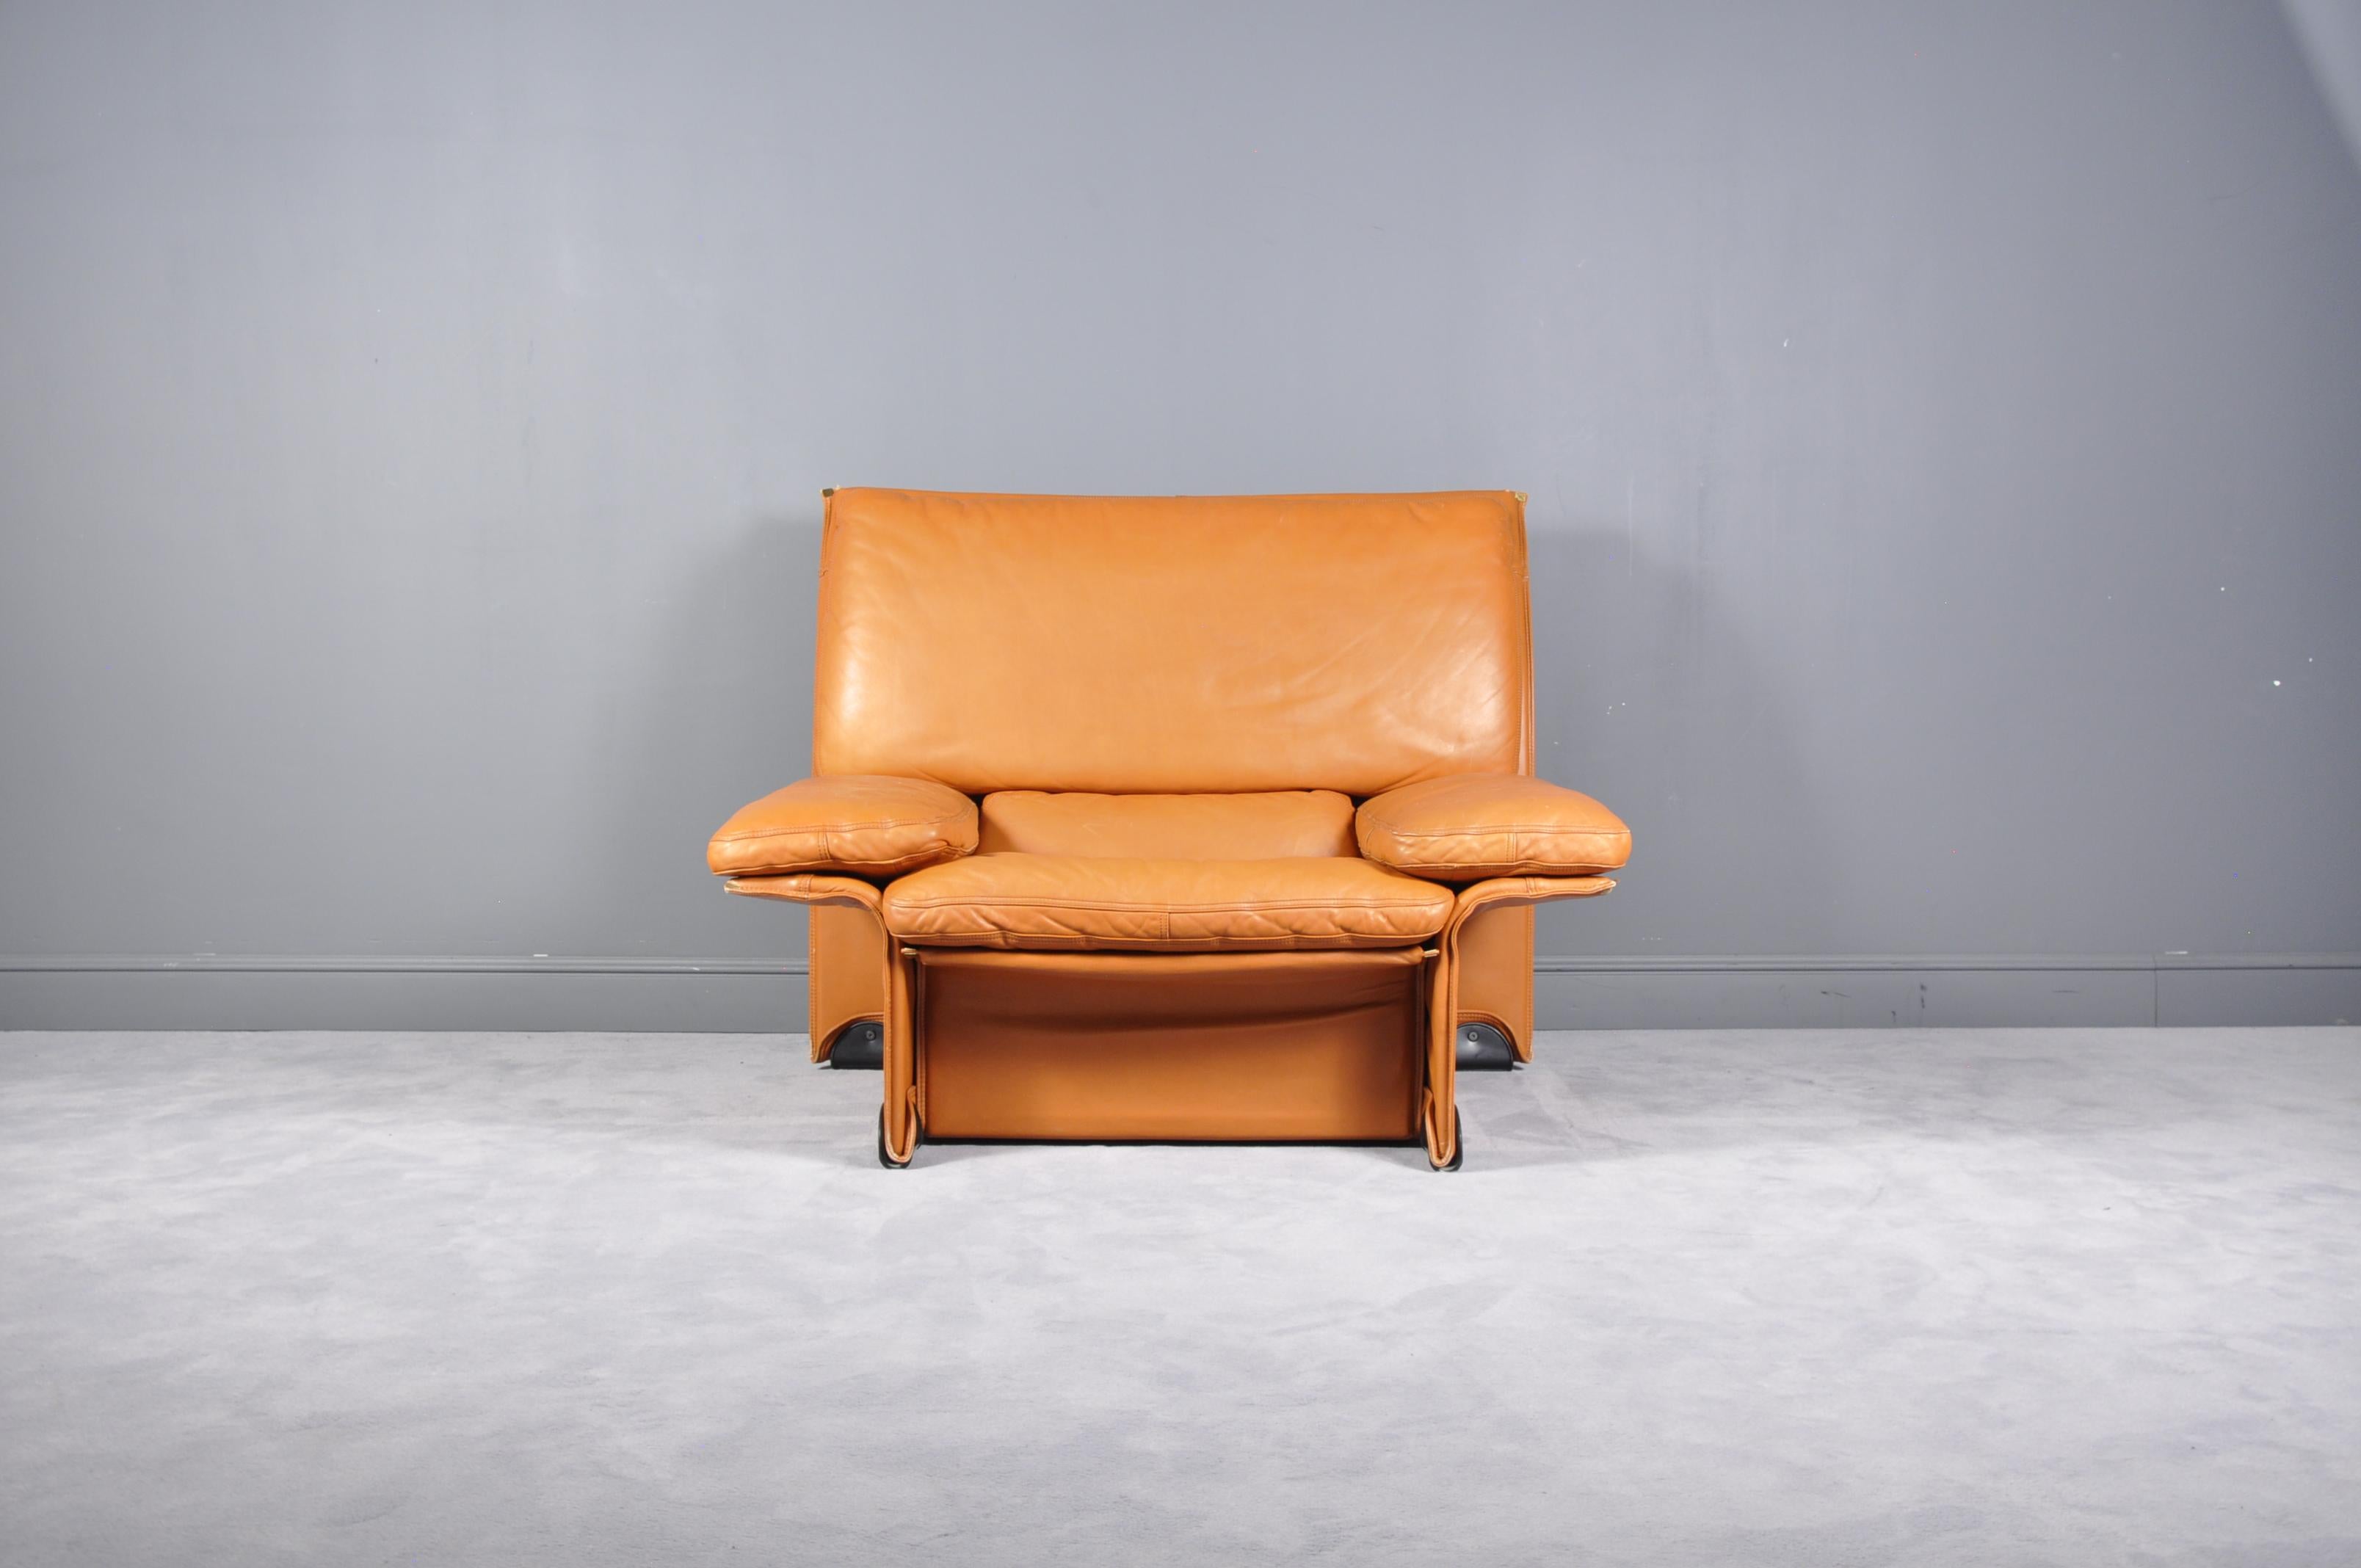 Relaxing lounge armchair and ottoman designed by Titiana Ammannati & Giampiero Vitelli in 1976s for Brunati,Italy
Measures: Armchair W 110 / D 95 / H 85 cm
Ottoman W 90 / D 75 / H 35 cm.